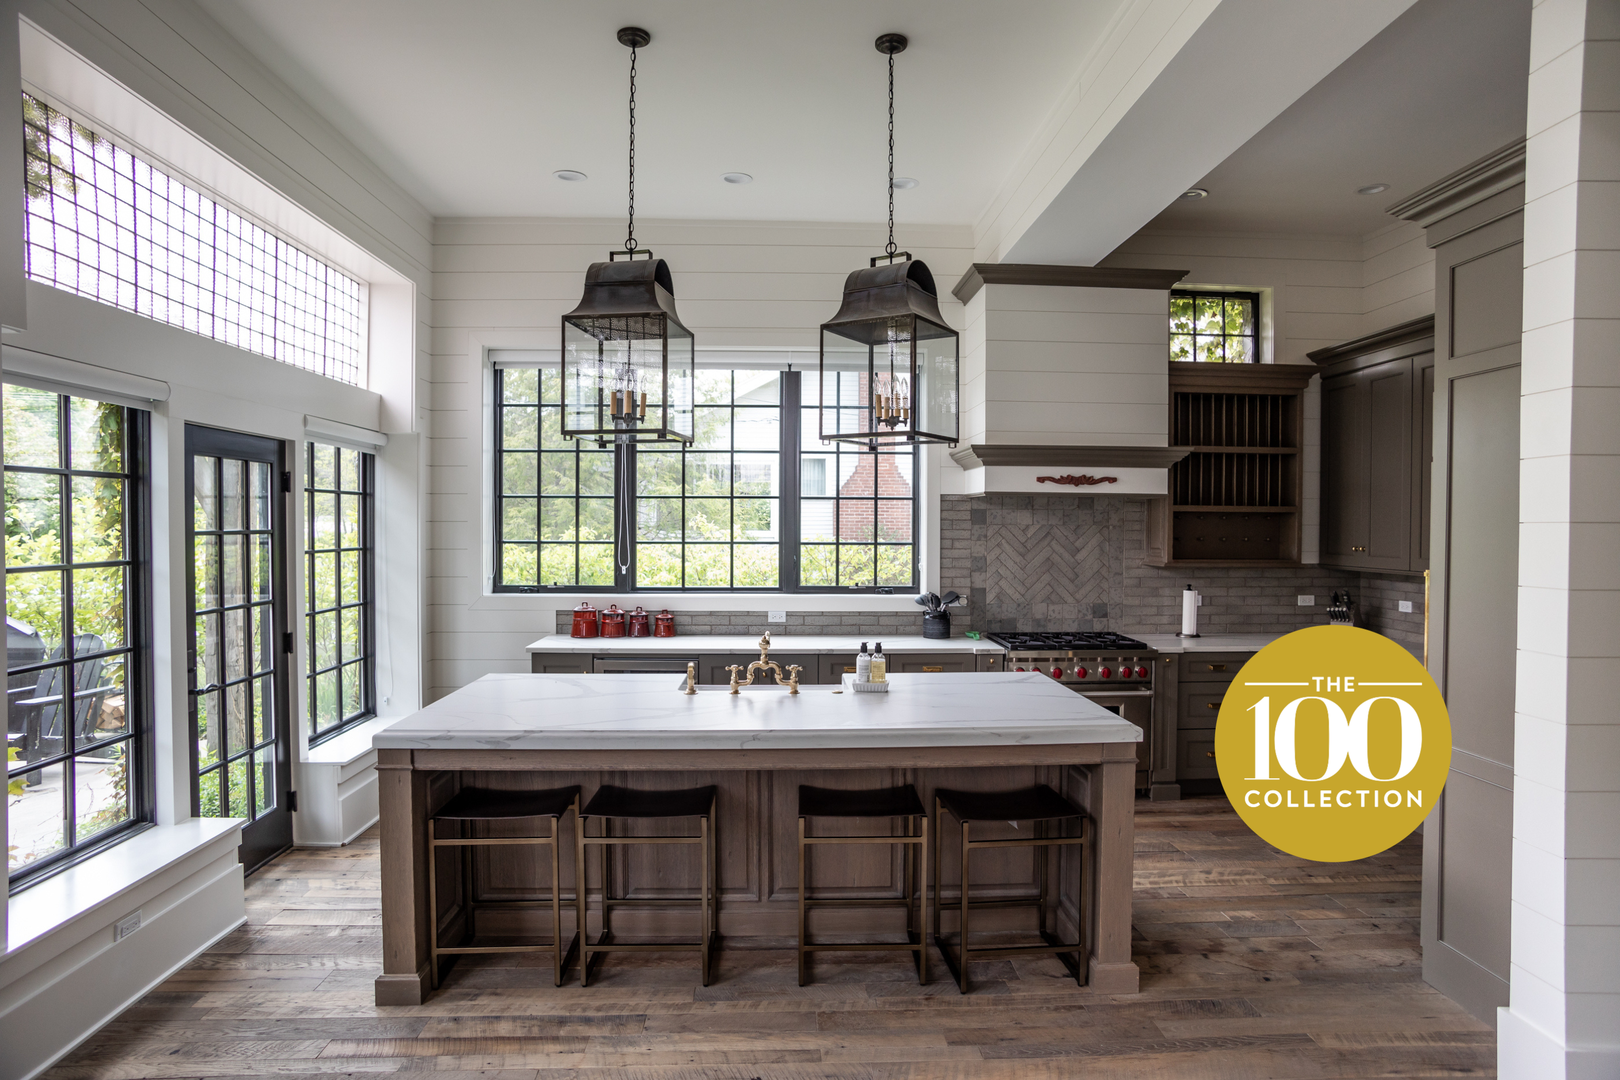 This is a statement kitchen where every meal served will be a true culinary delight. Part of the 100 Collection